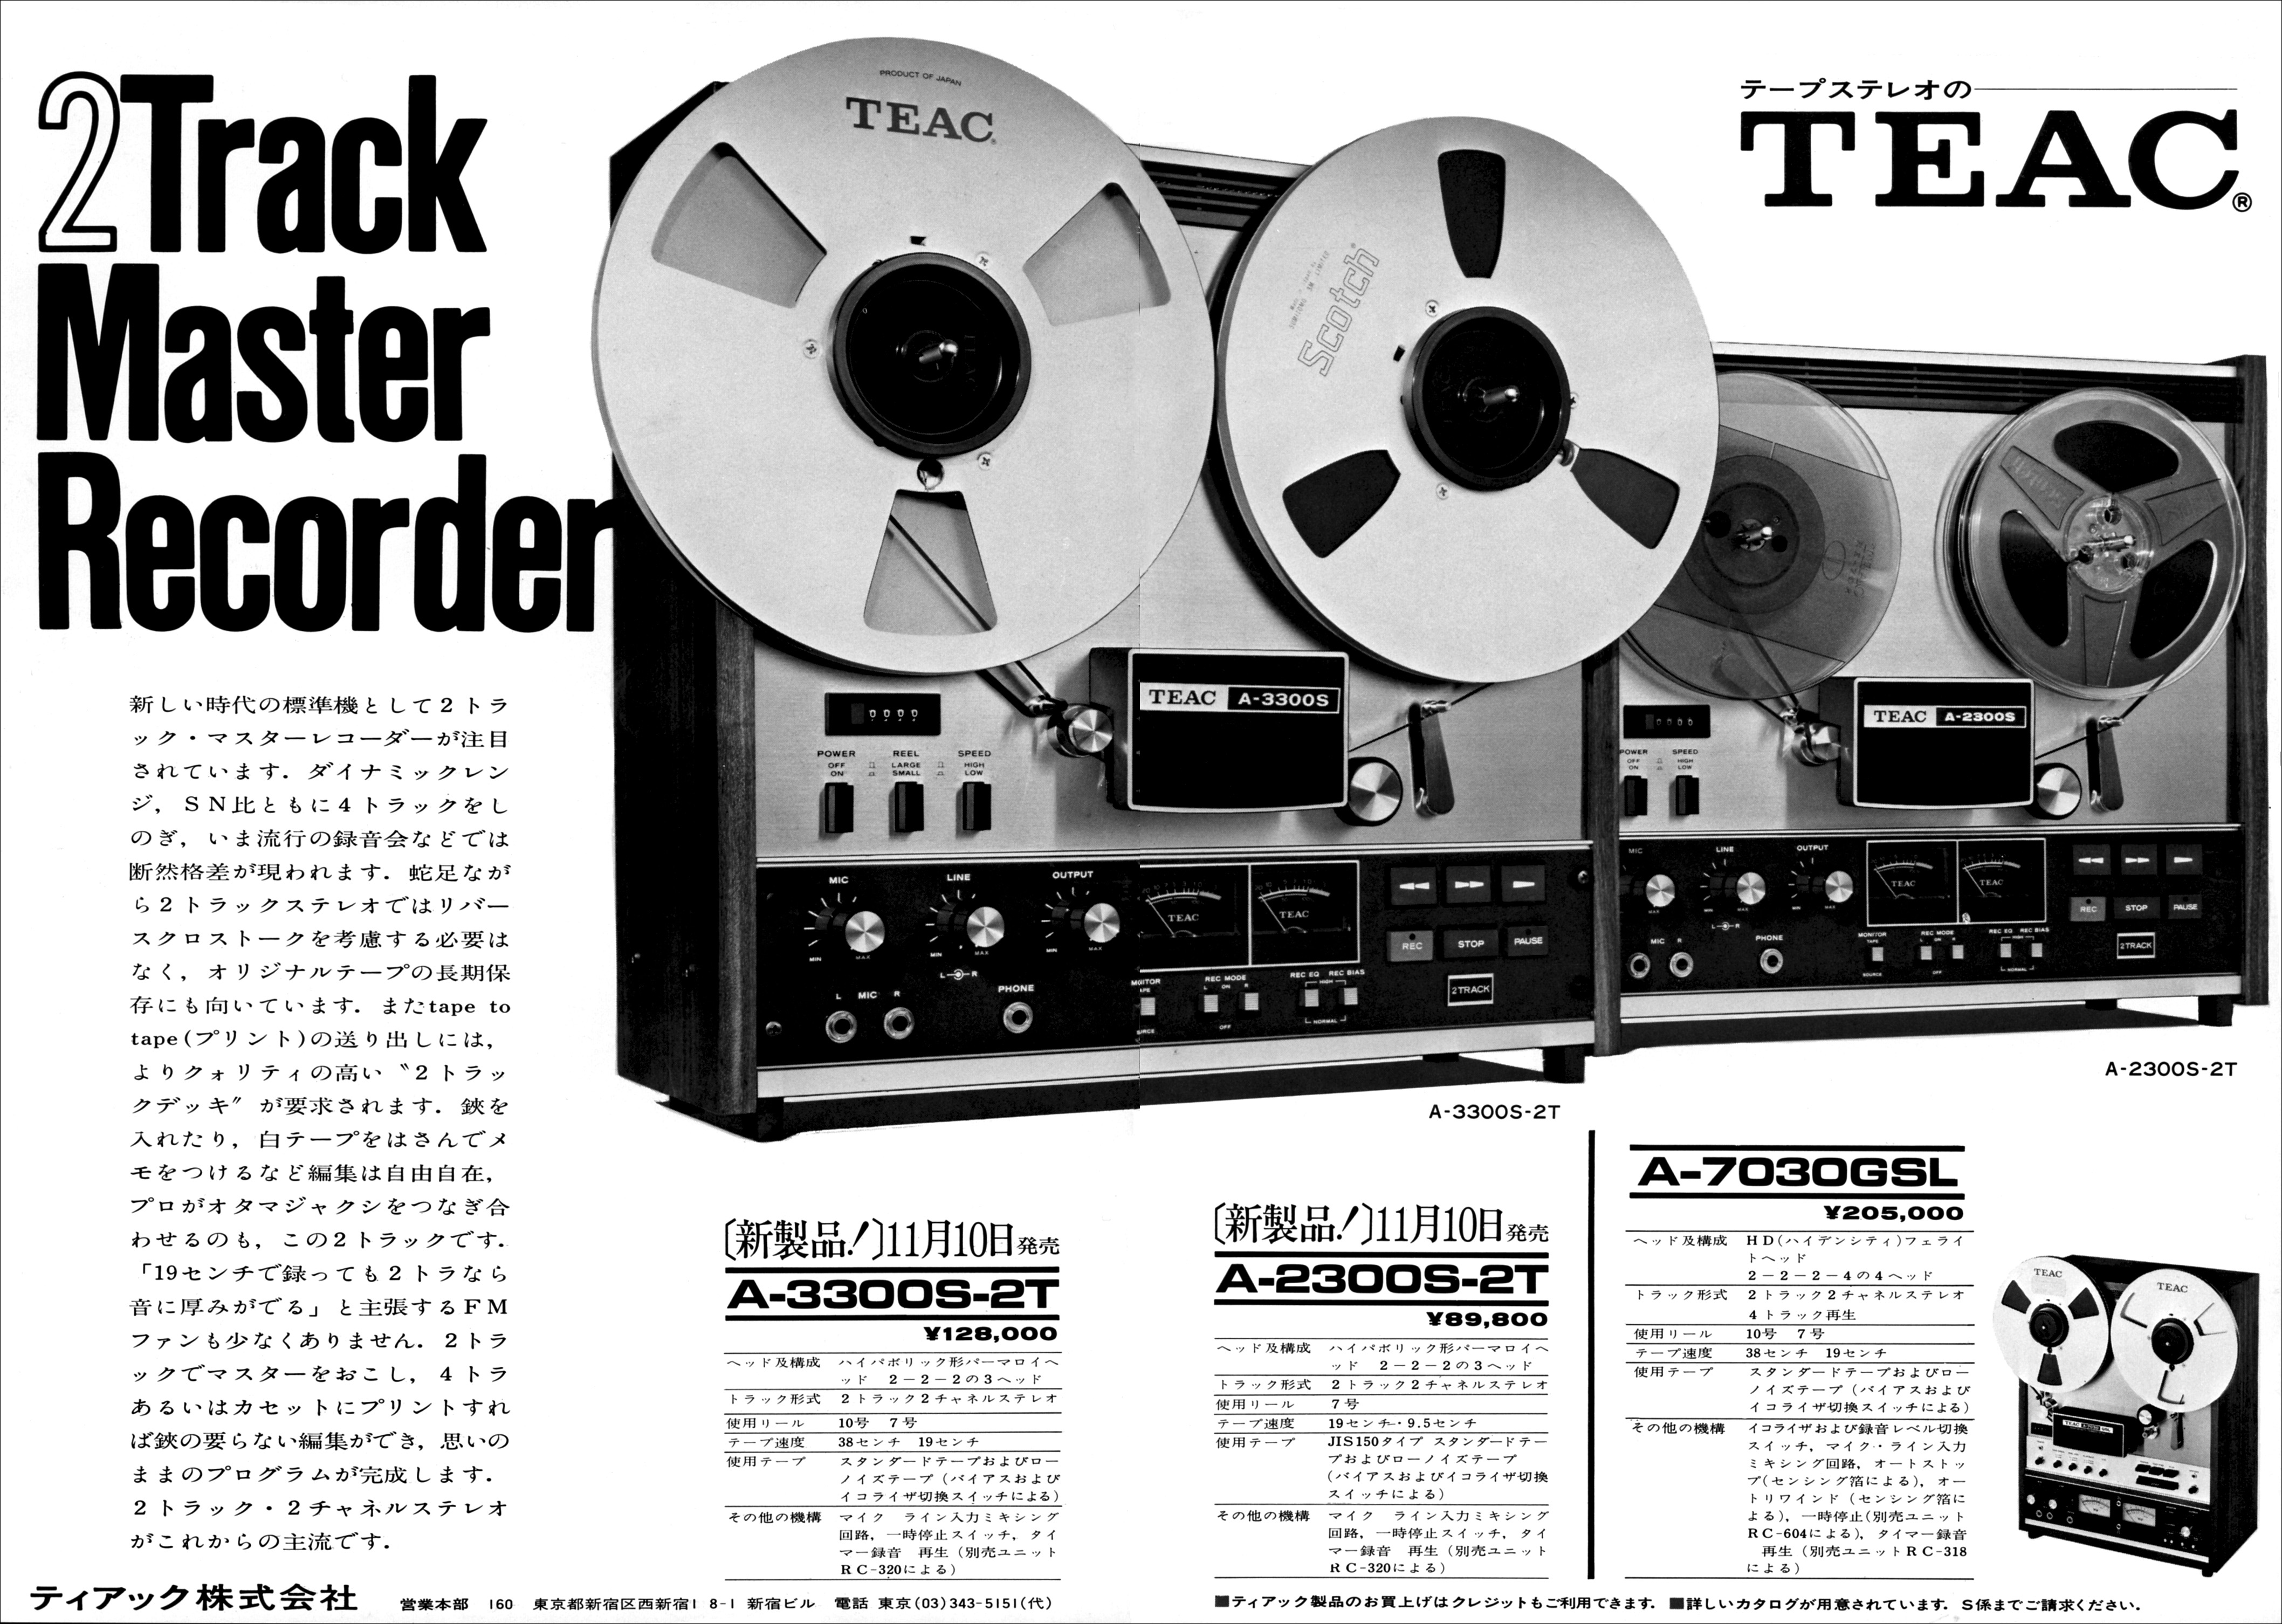 TEAC ティアック オープンリール テープデッキ A-2300S-2T-